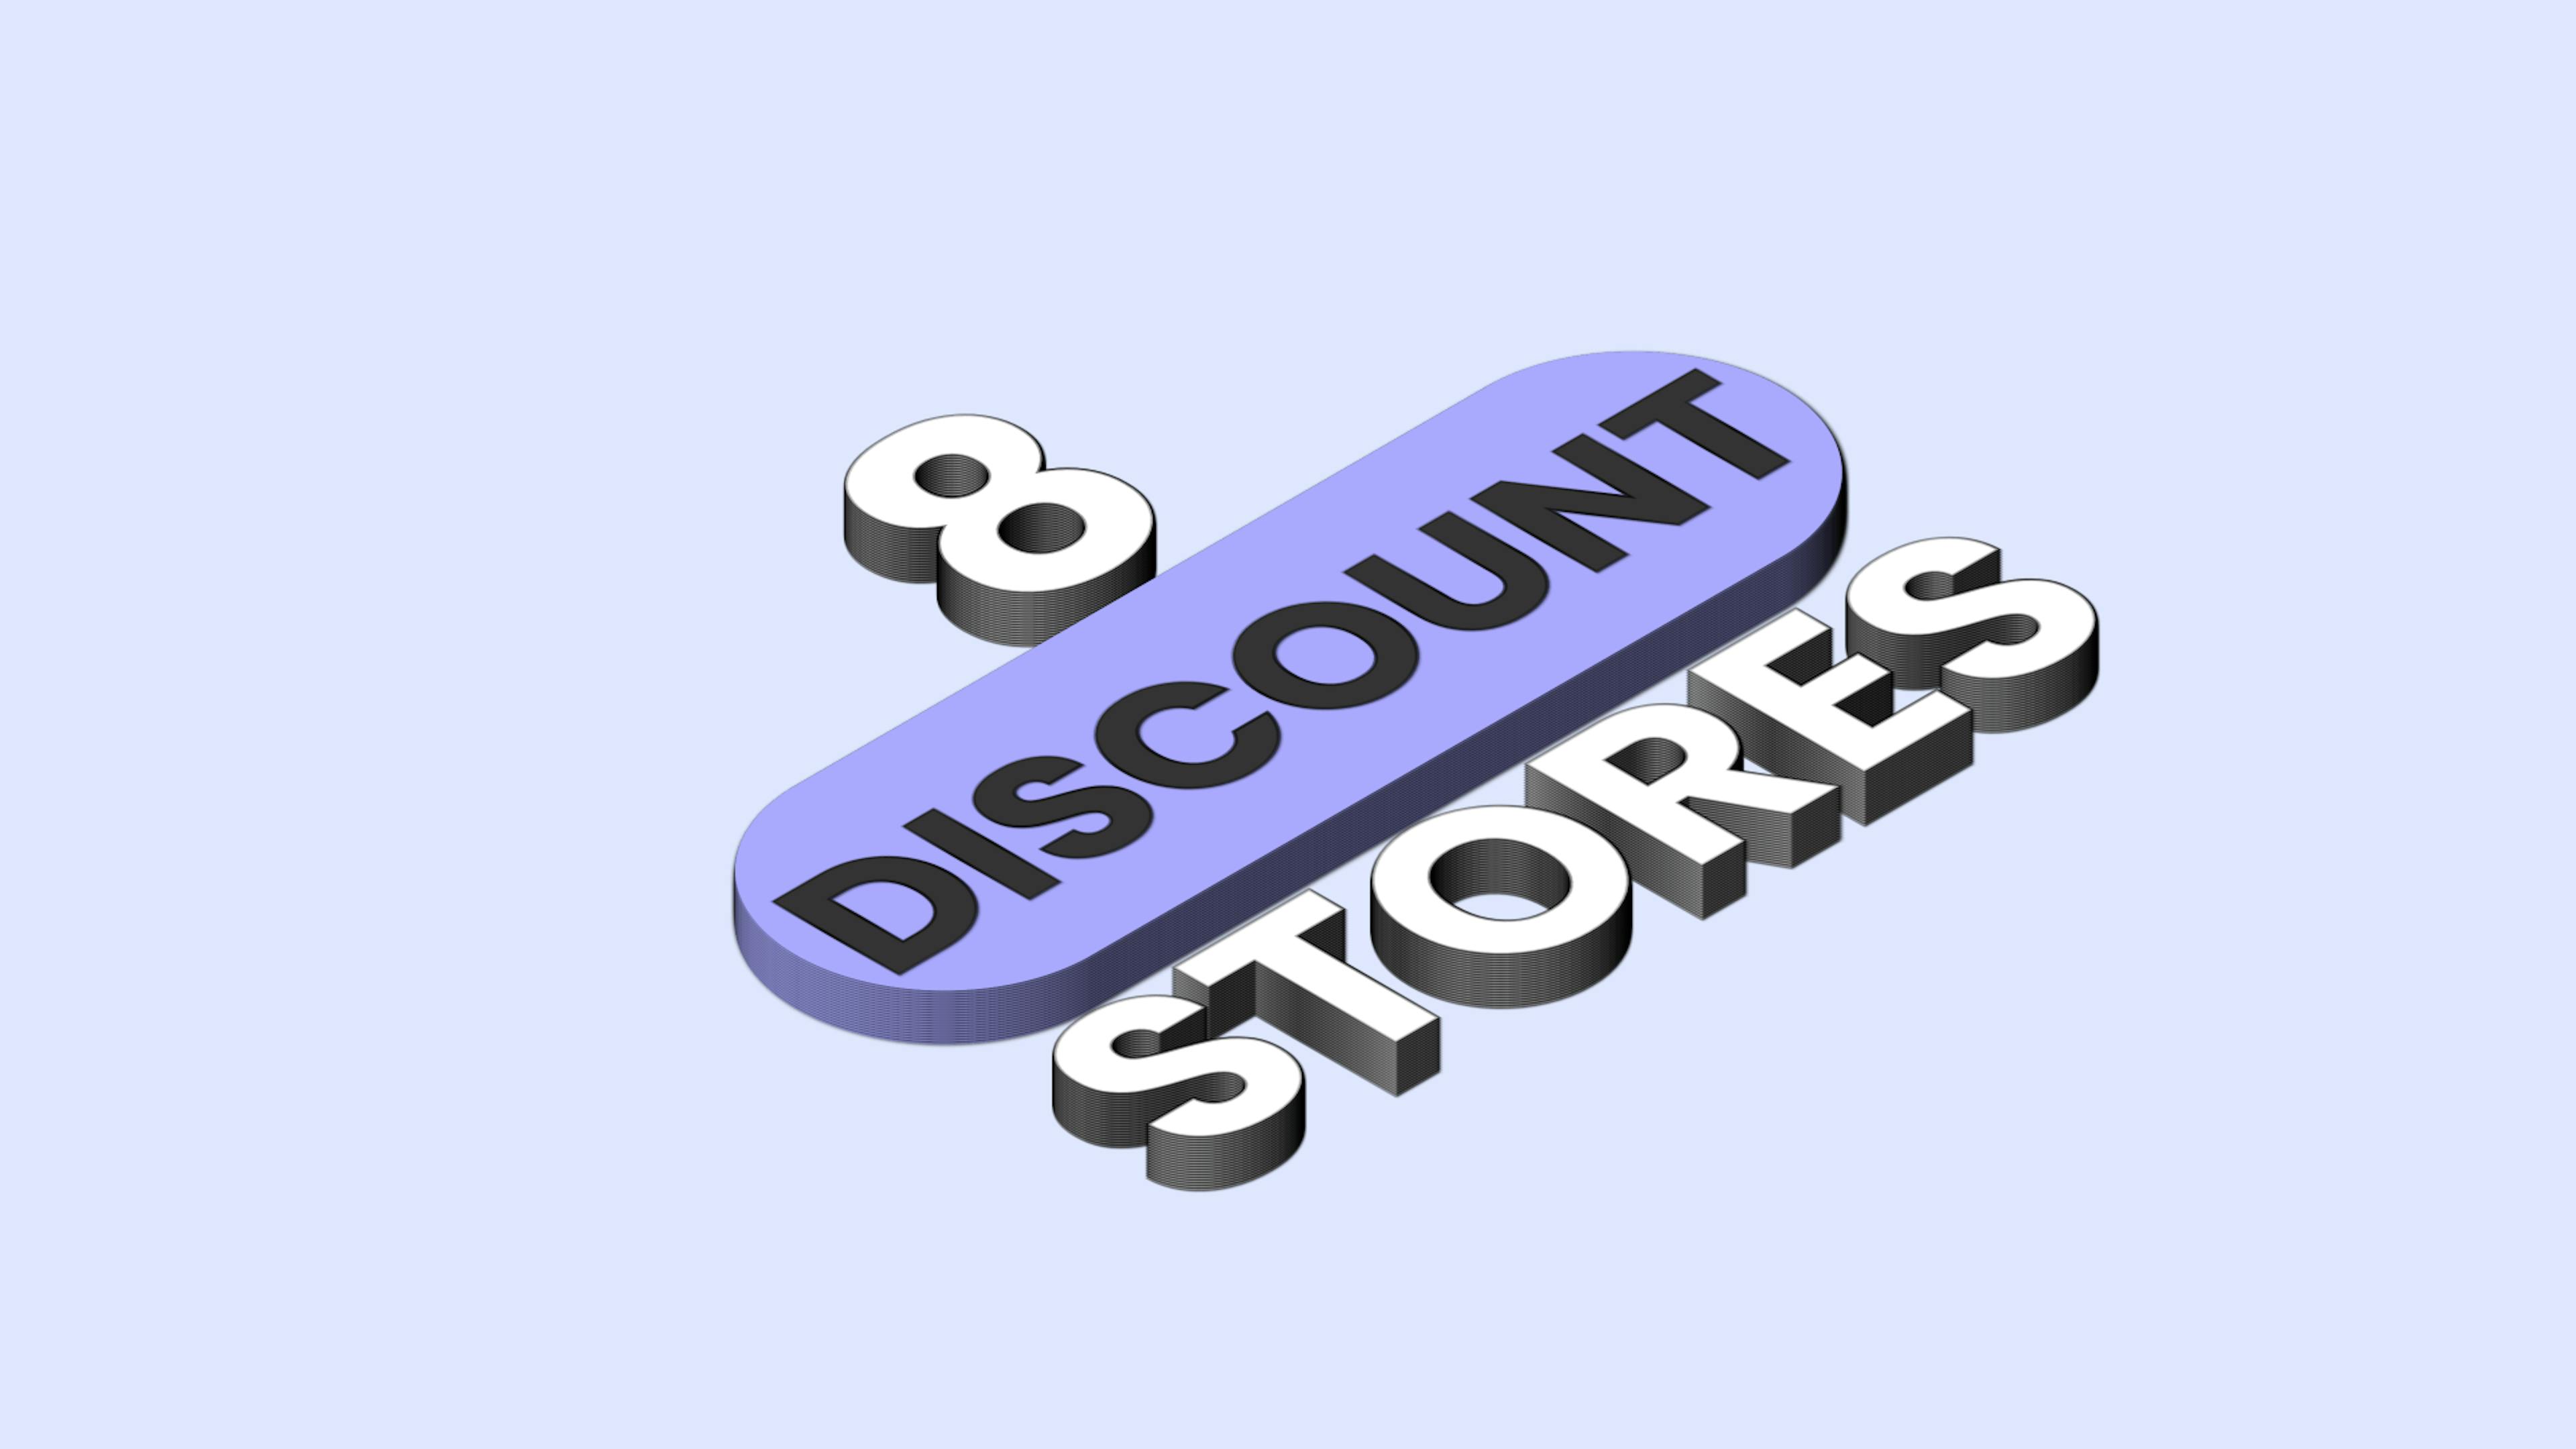 8 US discount stores